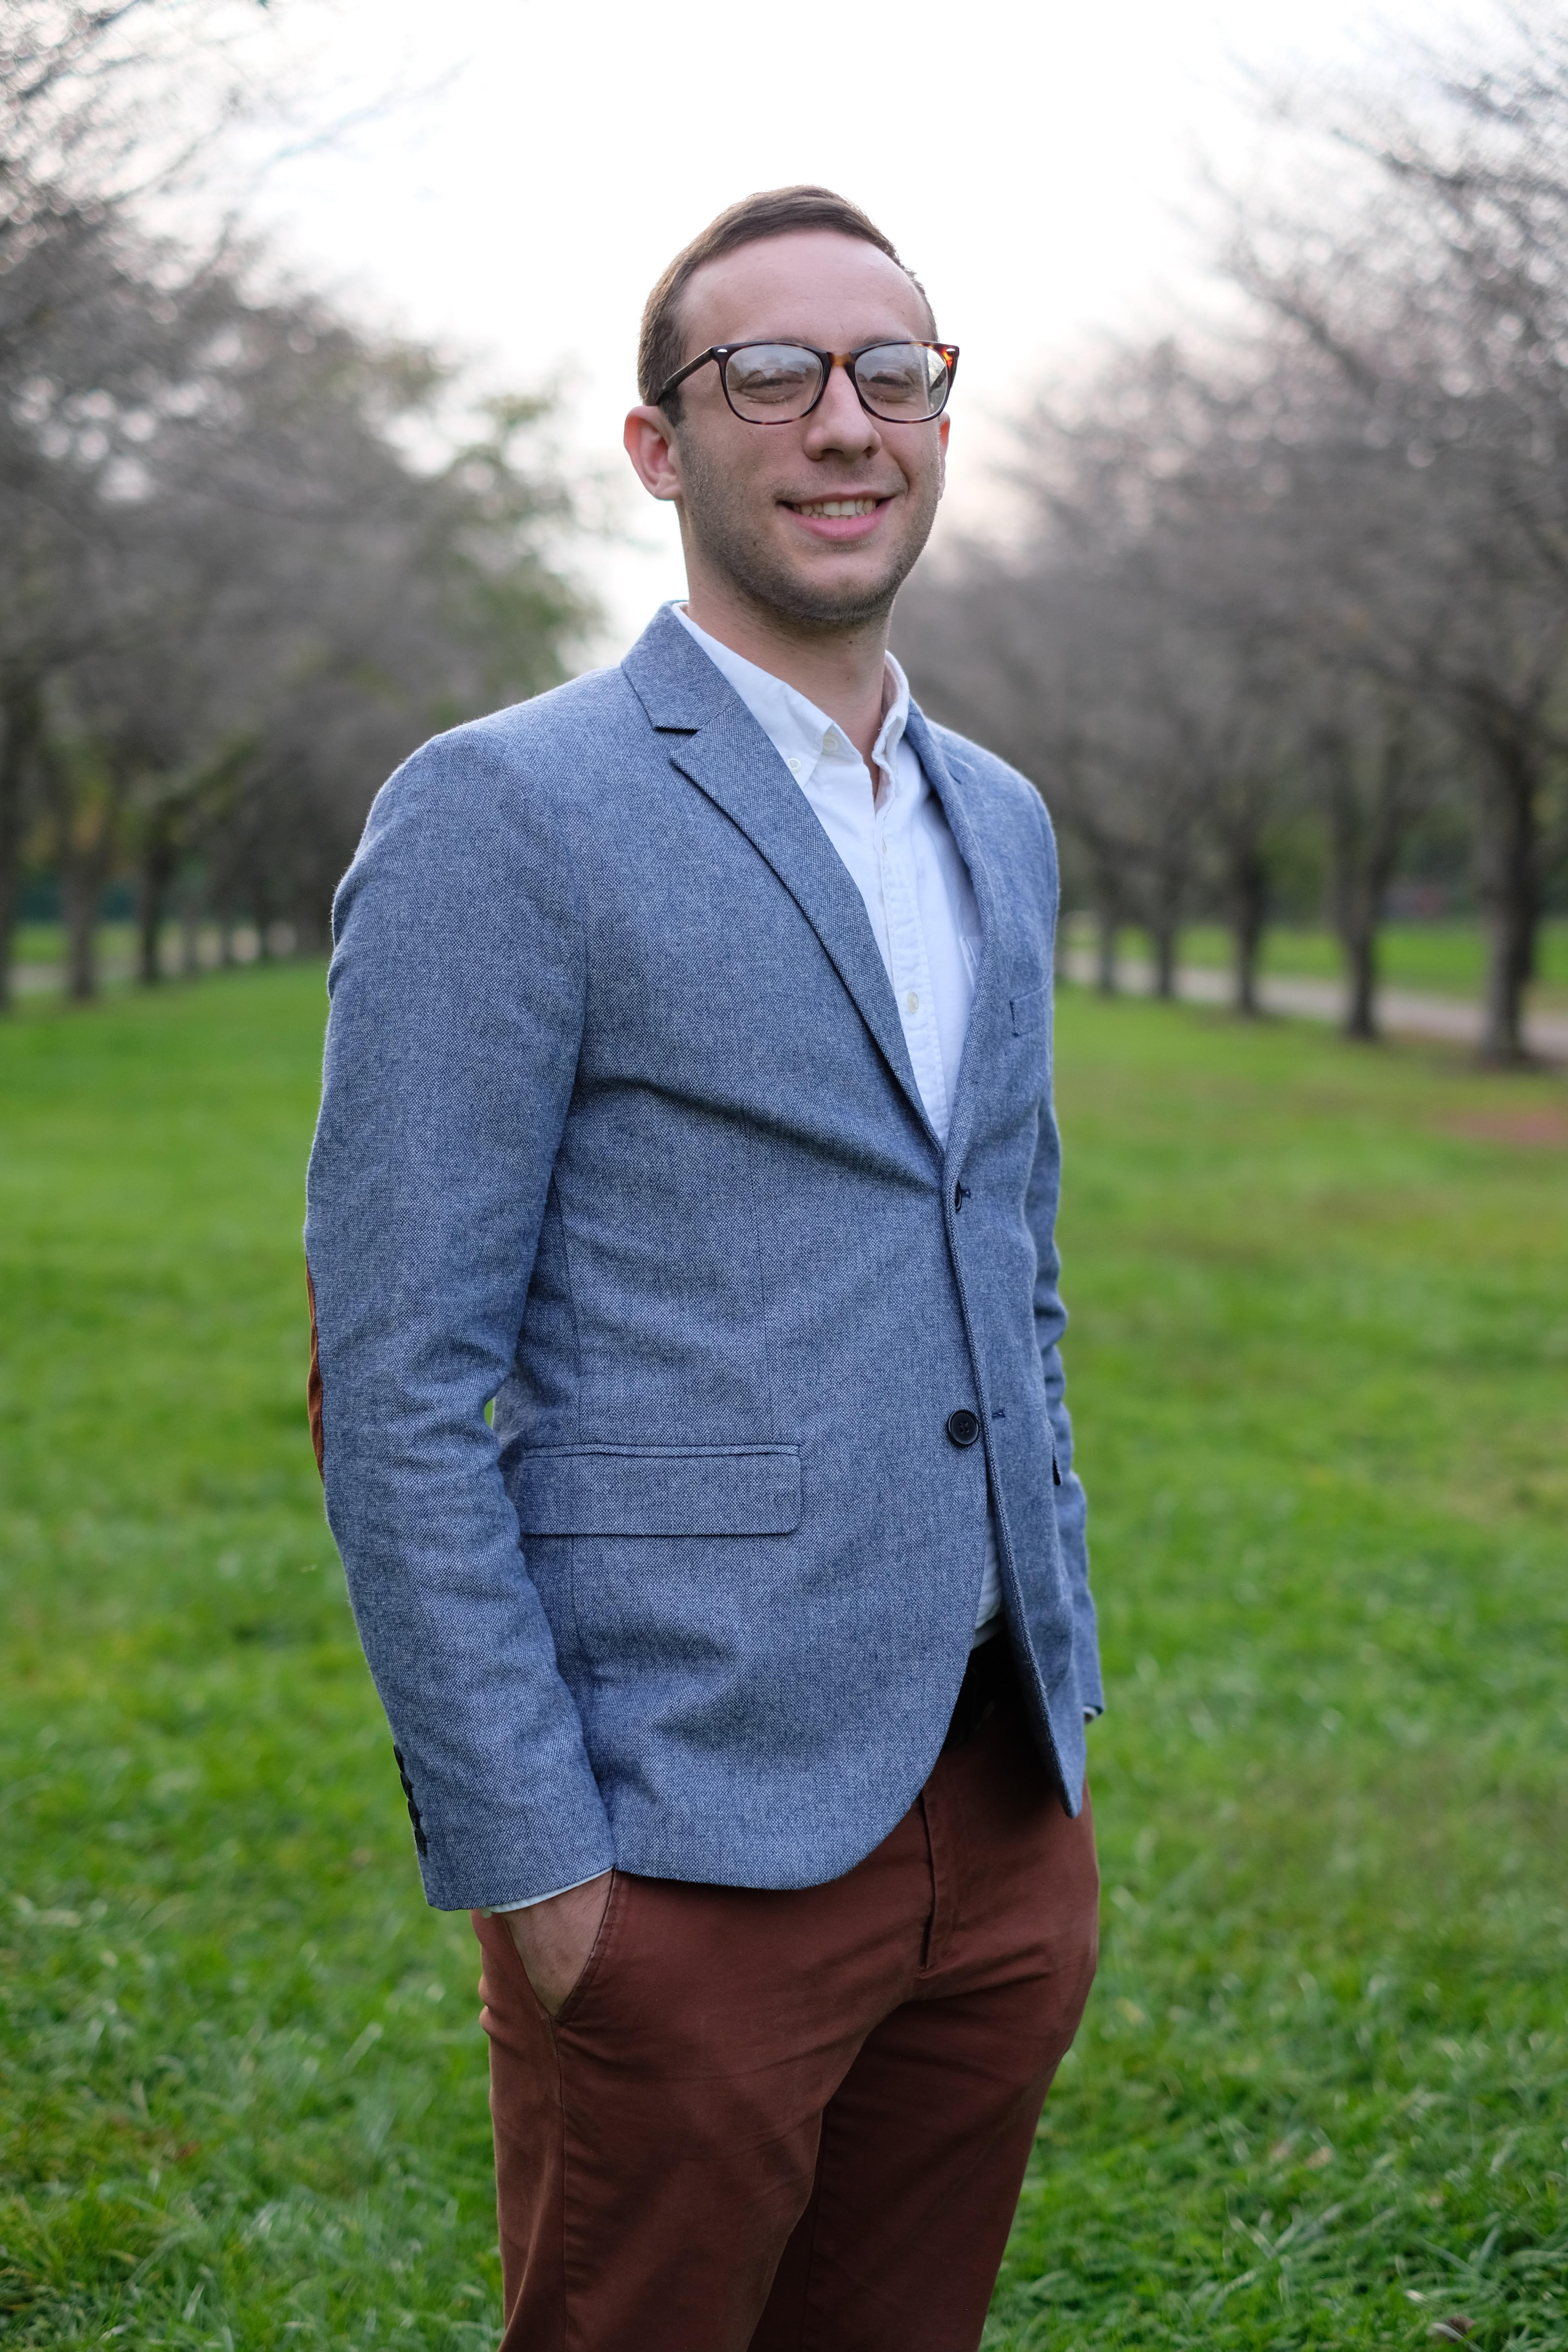 Man in a blue blazer and tortoiseshell glasses stands in a field and smiles at the camera.